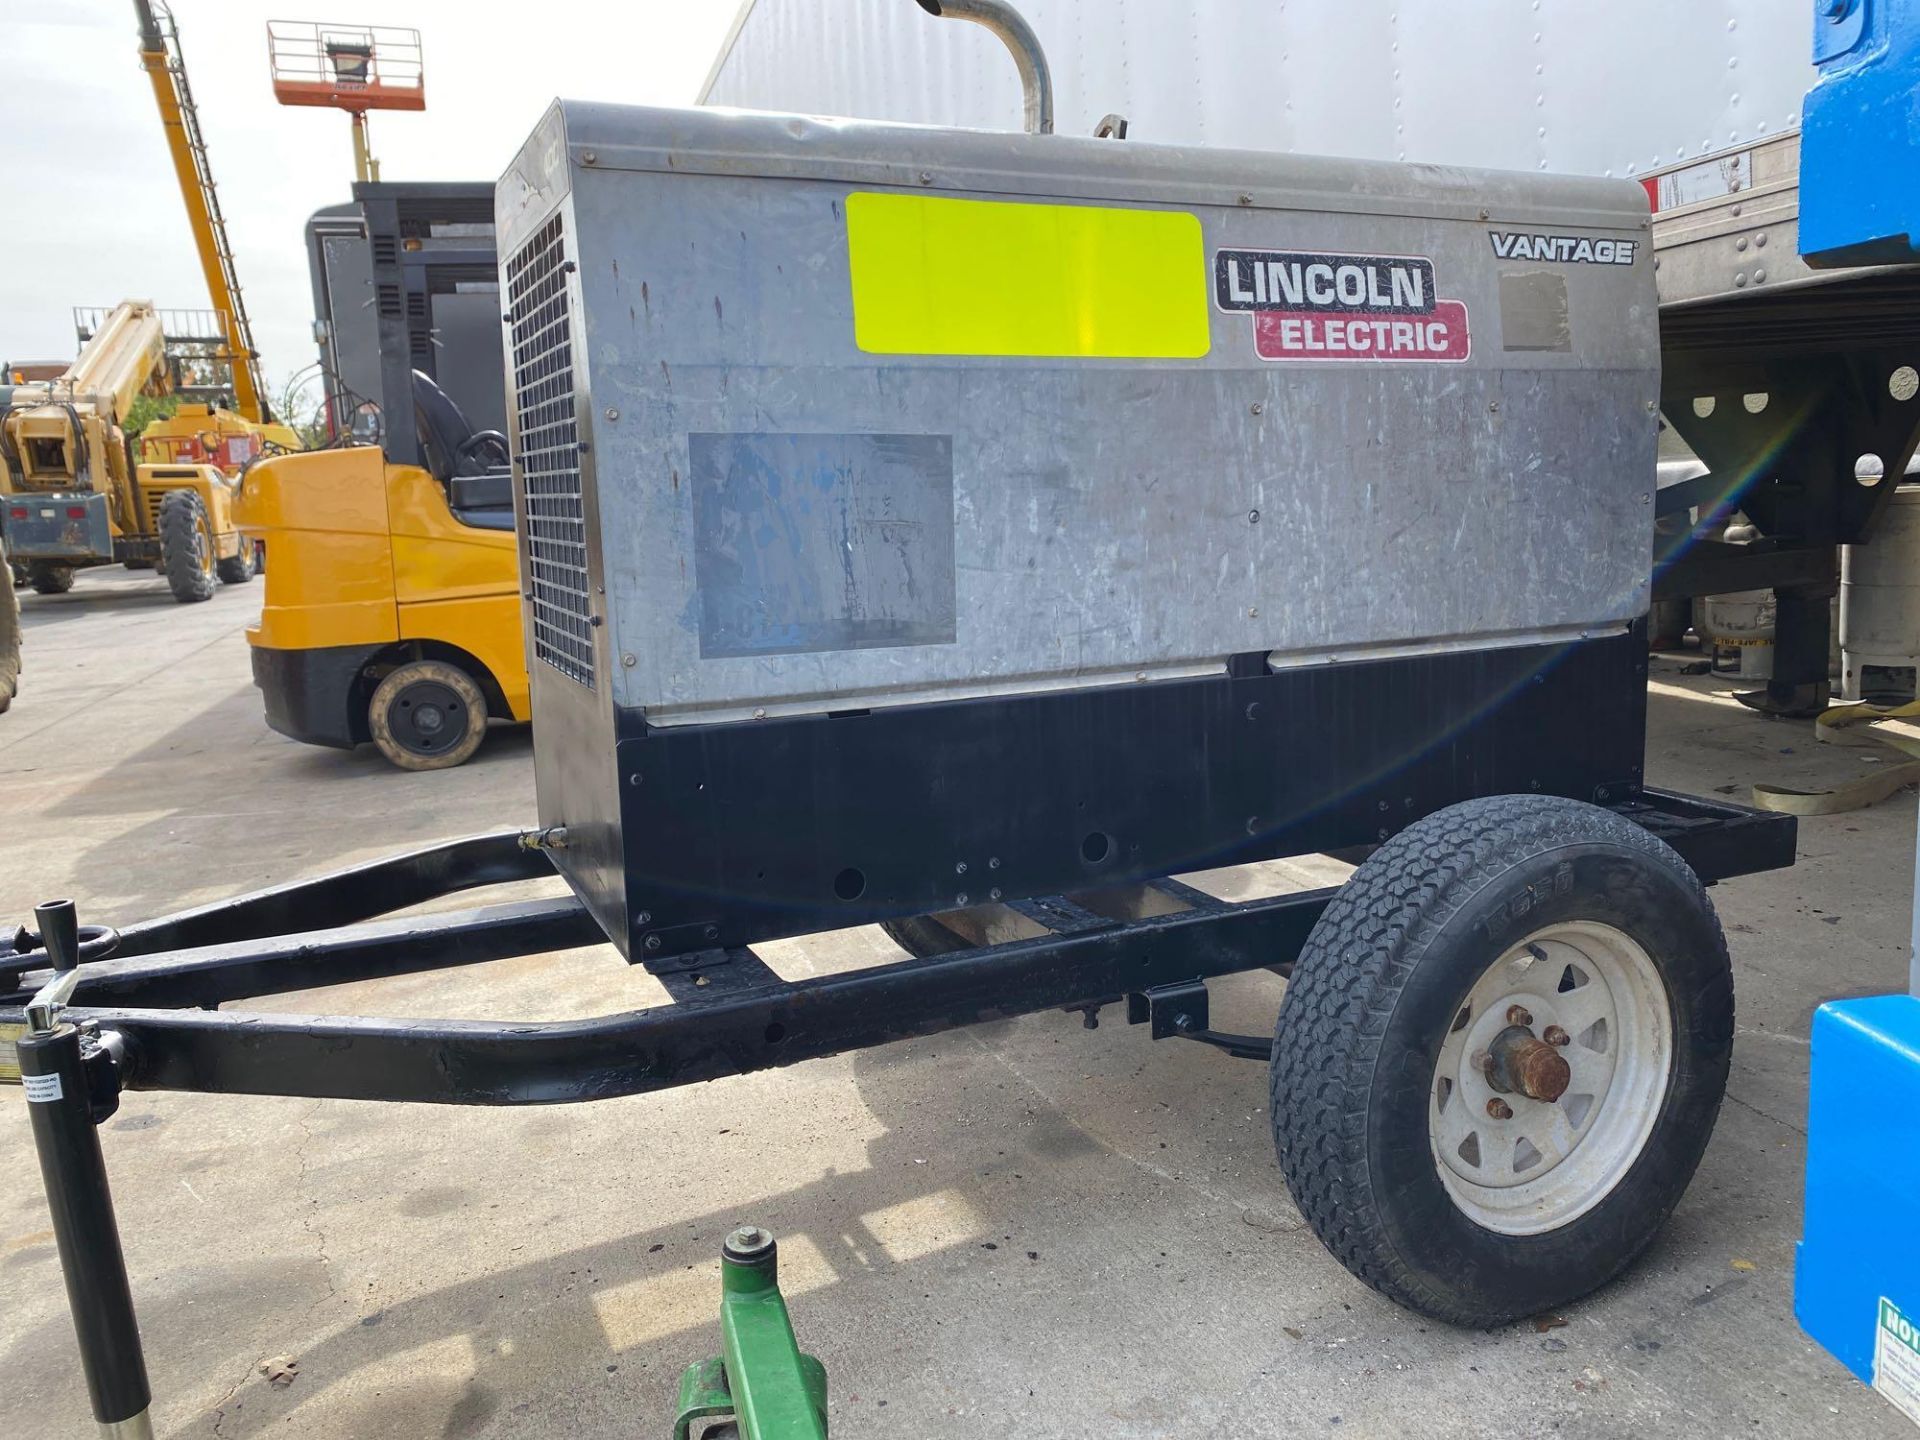 2013 LINCOLN ELECTRIC VANTAGE 4000 TRAILER MOUNTED DIESEL WELDER, RUNS AND OPERATES - Image 4 of 5